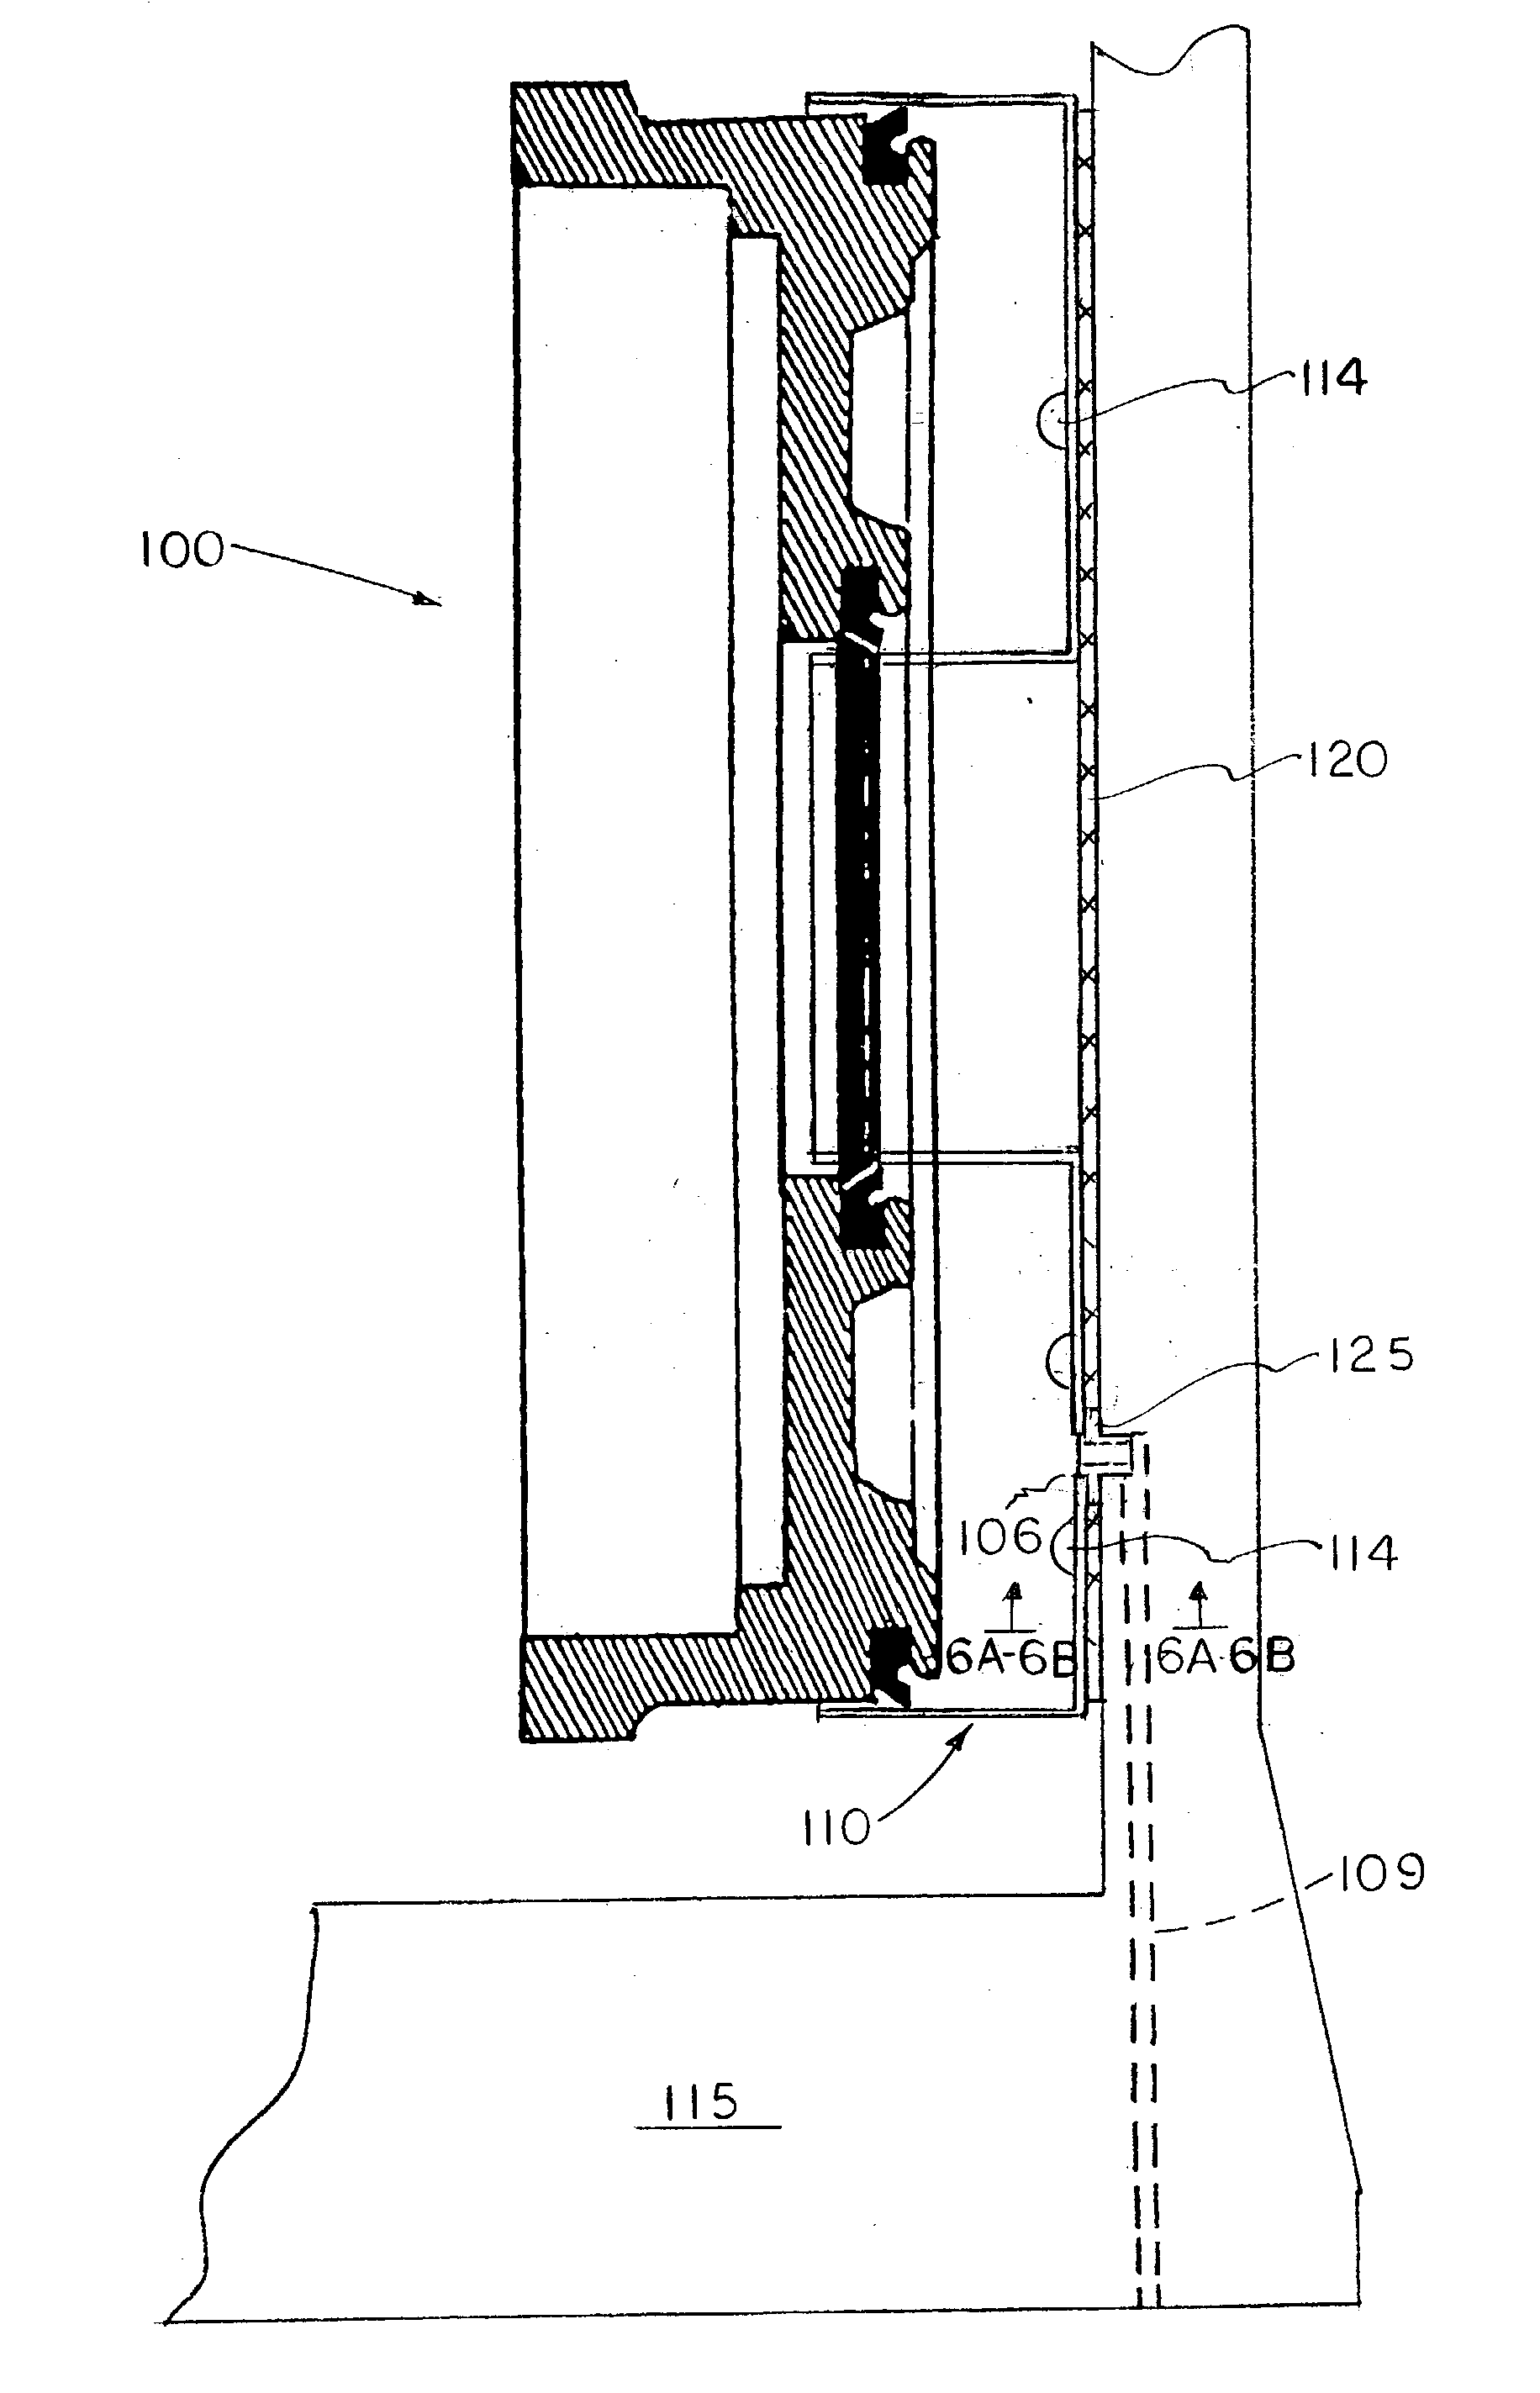 Method of sealing low/reverse piston fluid circuit within an automatic transmission case